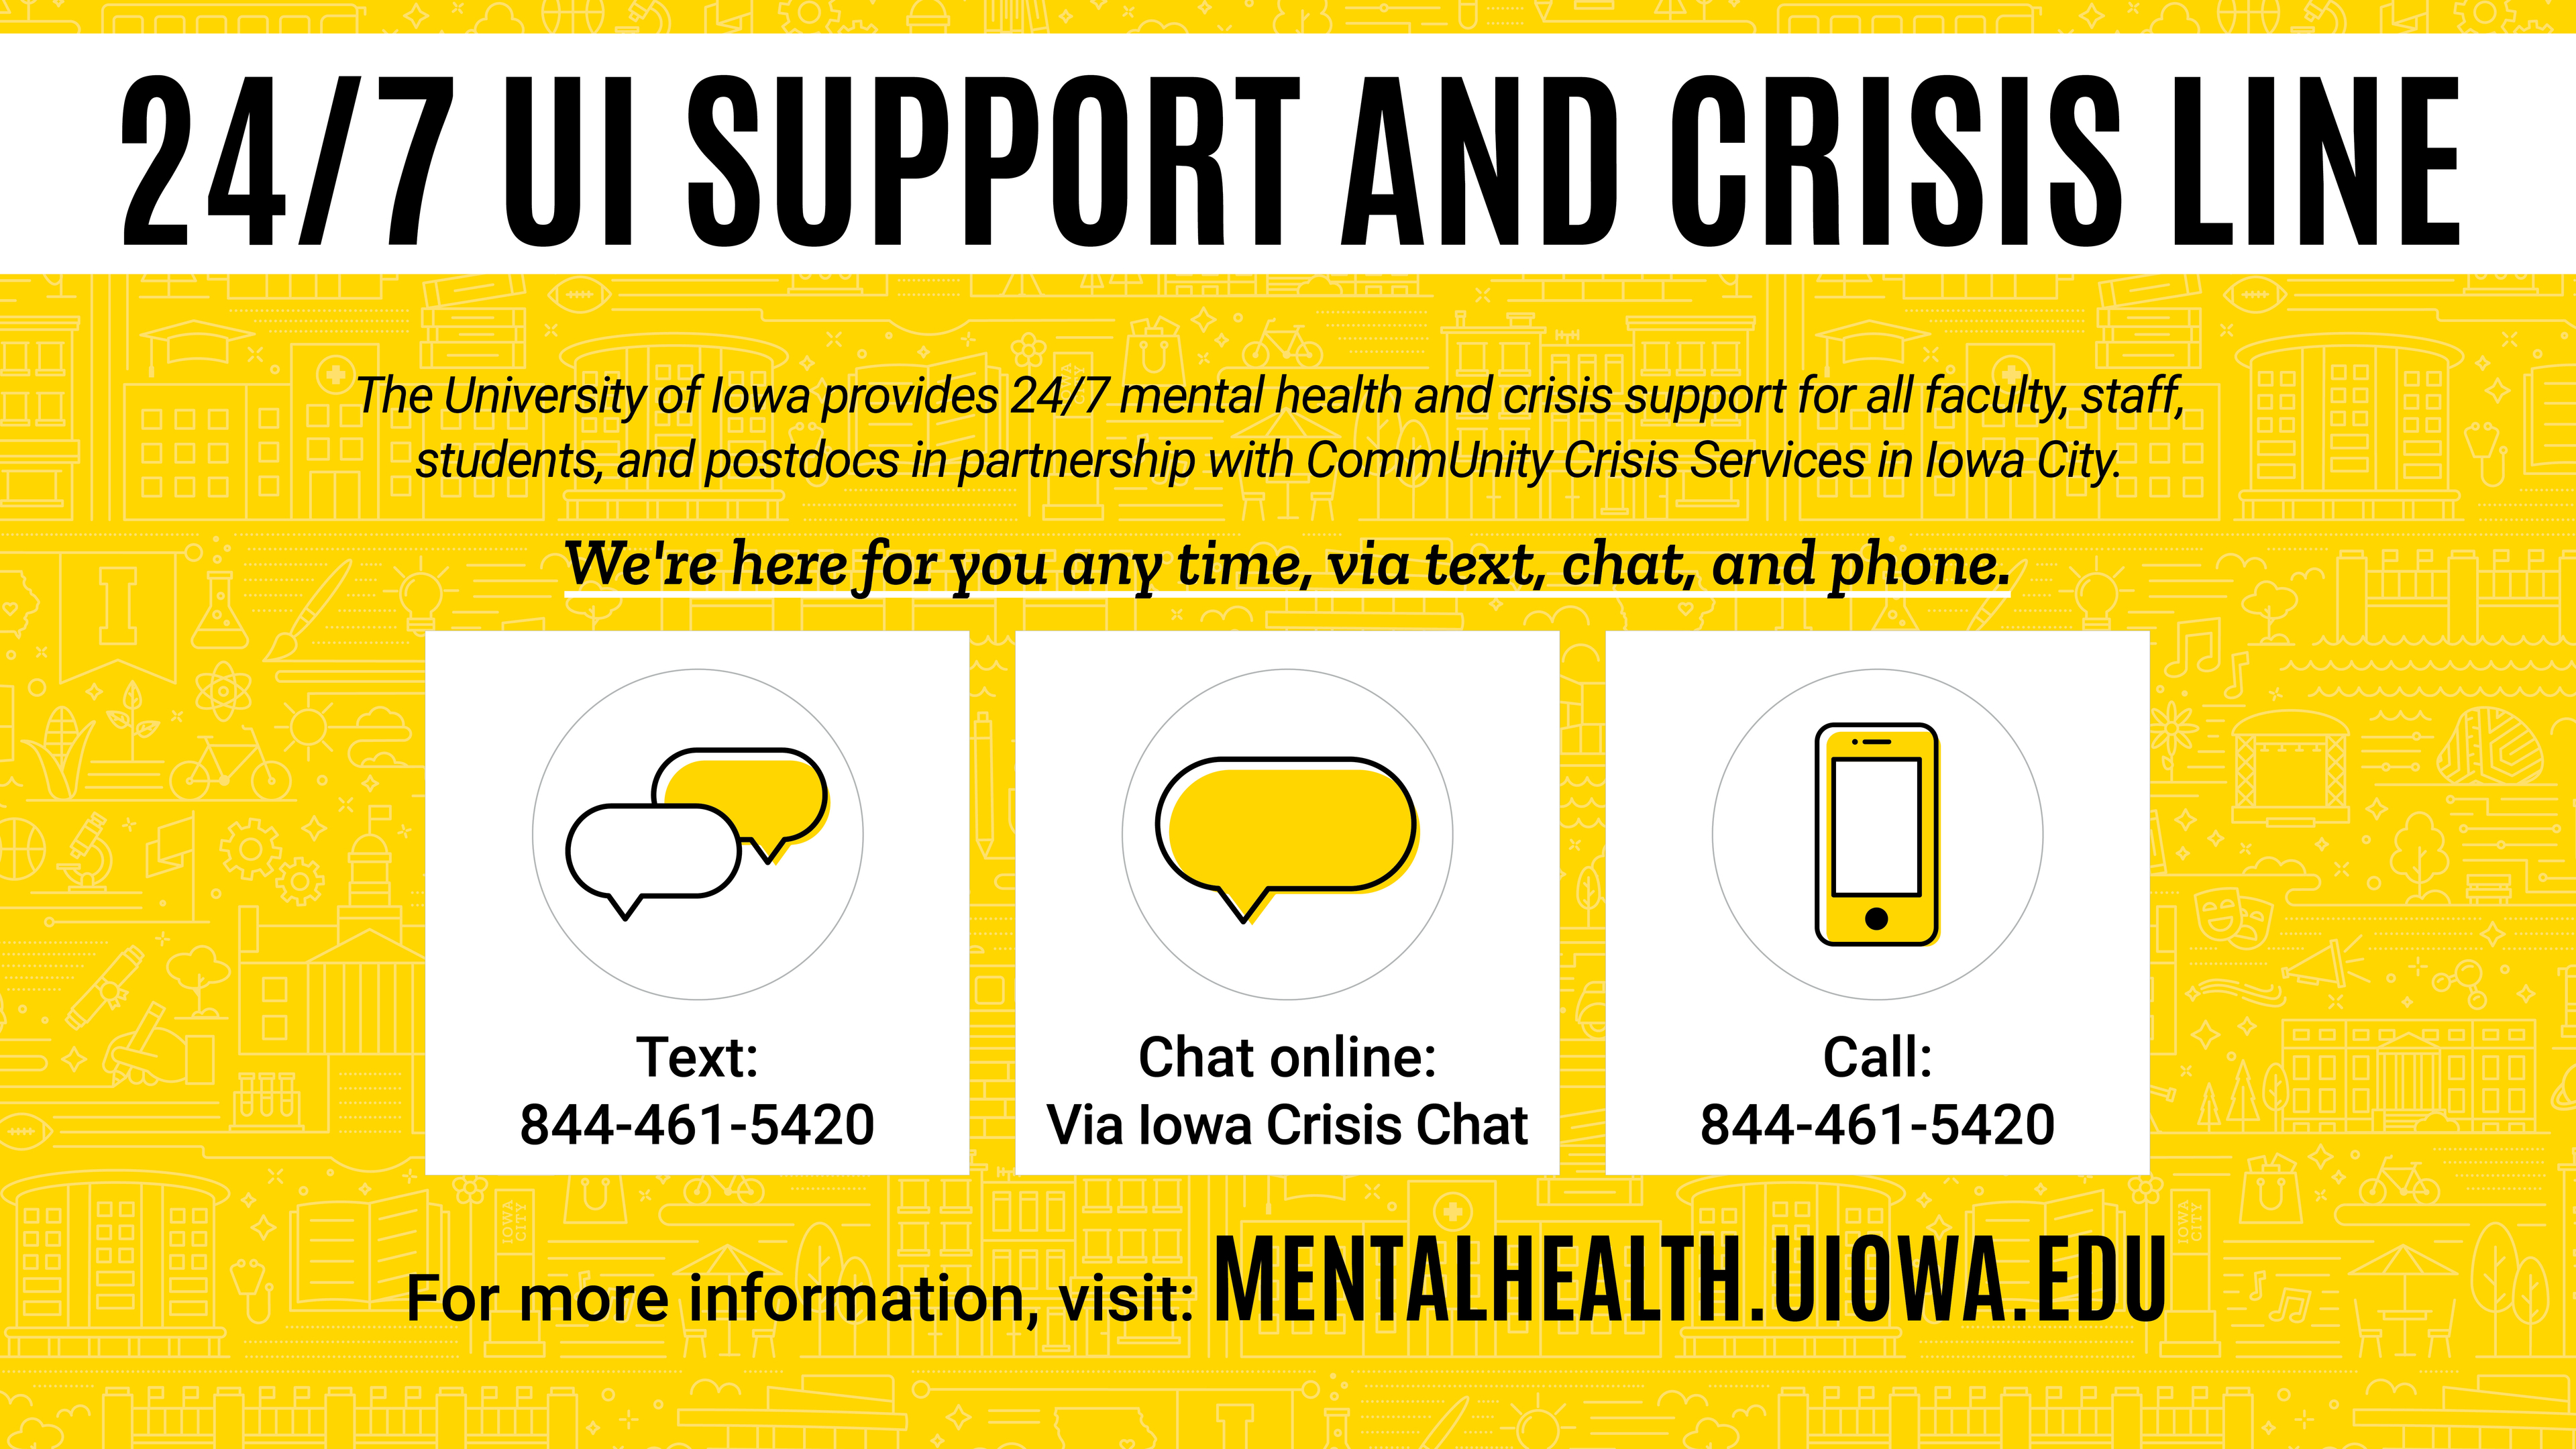 24/7 UI Support and Crisis Line 844-461-5420